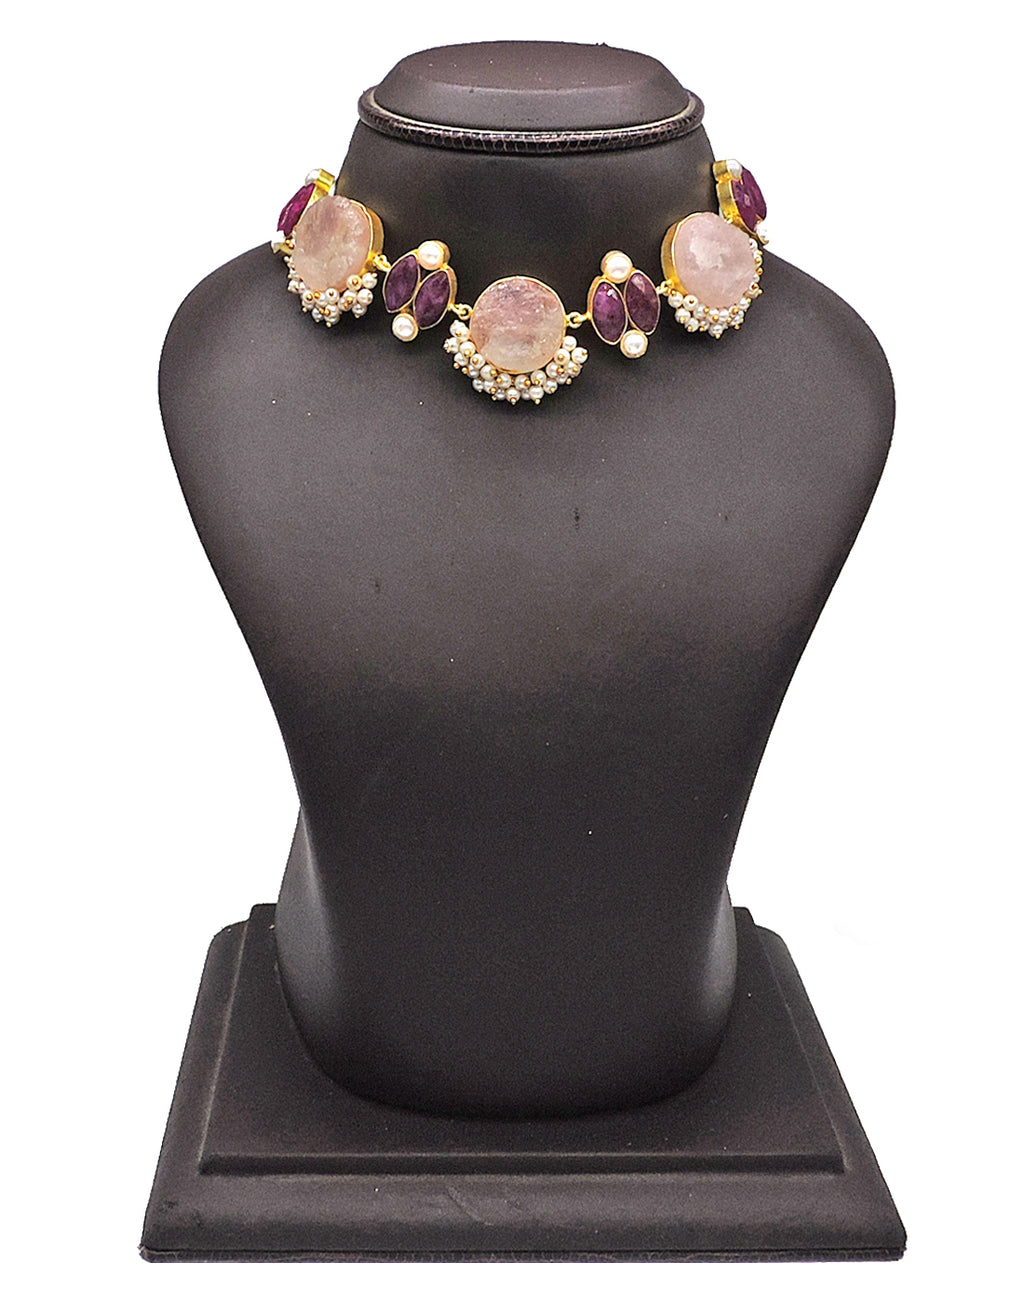 Rose & Red Haathi Necklace - Statement Necklaces - Gold-Plated & Hypoallergenic Jewellery - Made in India - Dubai Jewellery - Dori